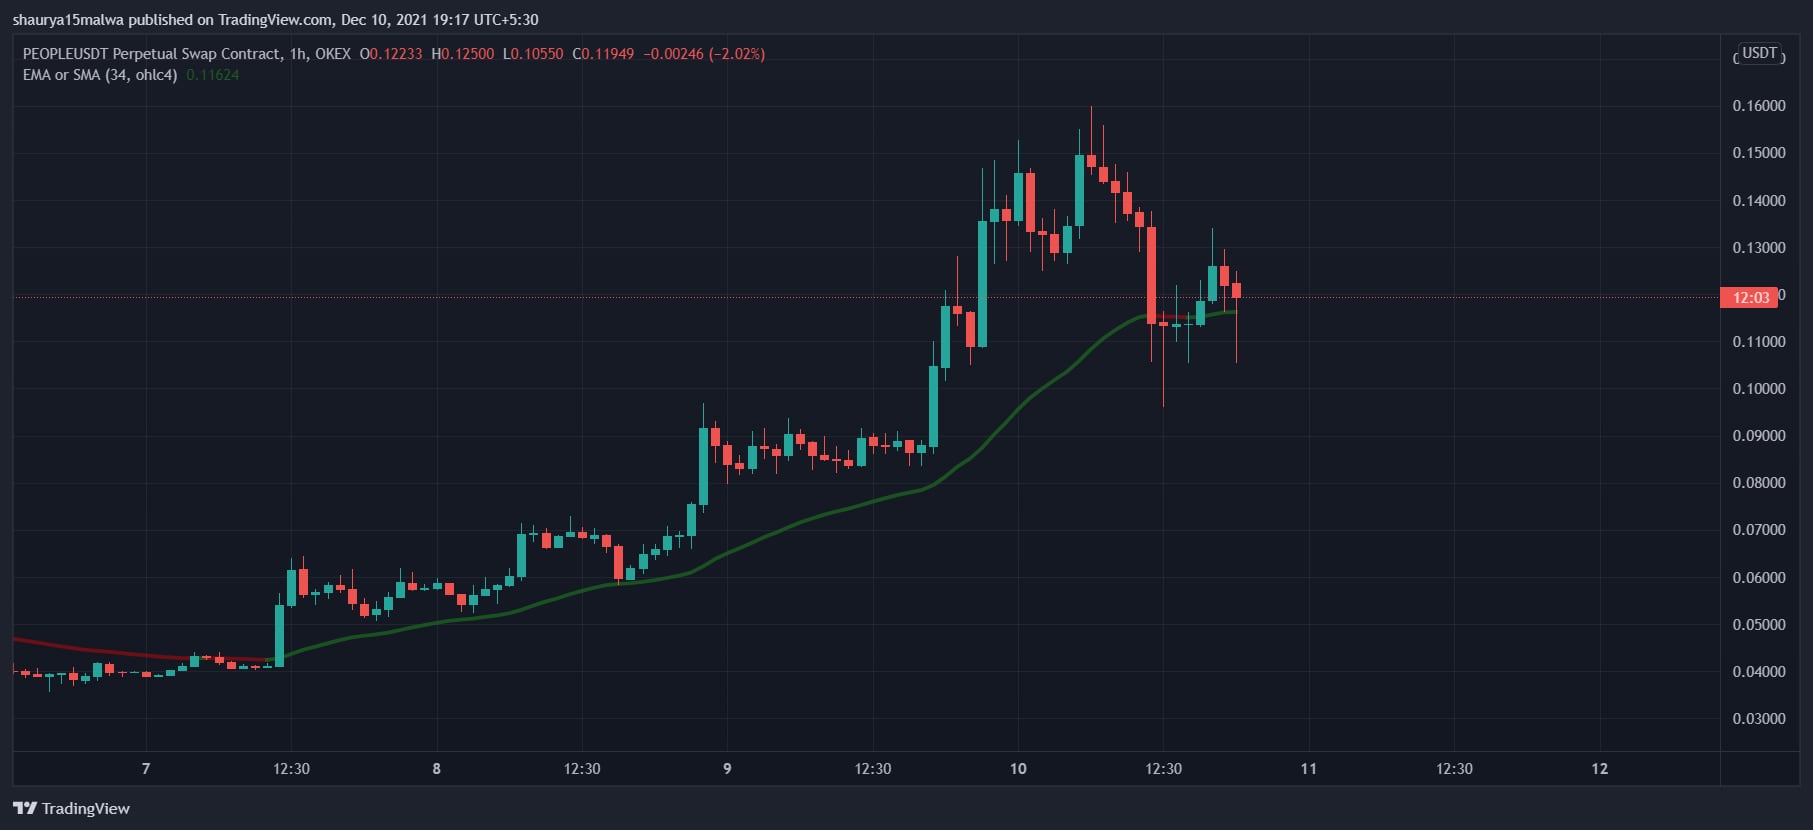 Hourly price chart of OKEx futures on ConstitutionDAO's PEOPLE tokens. (TradingView)